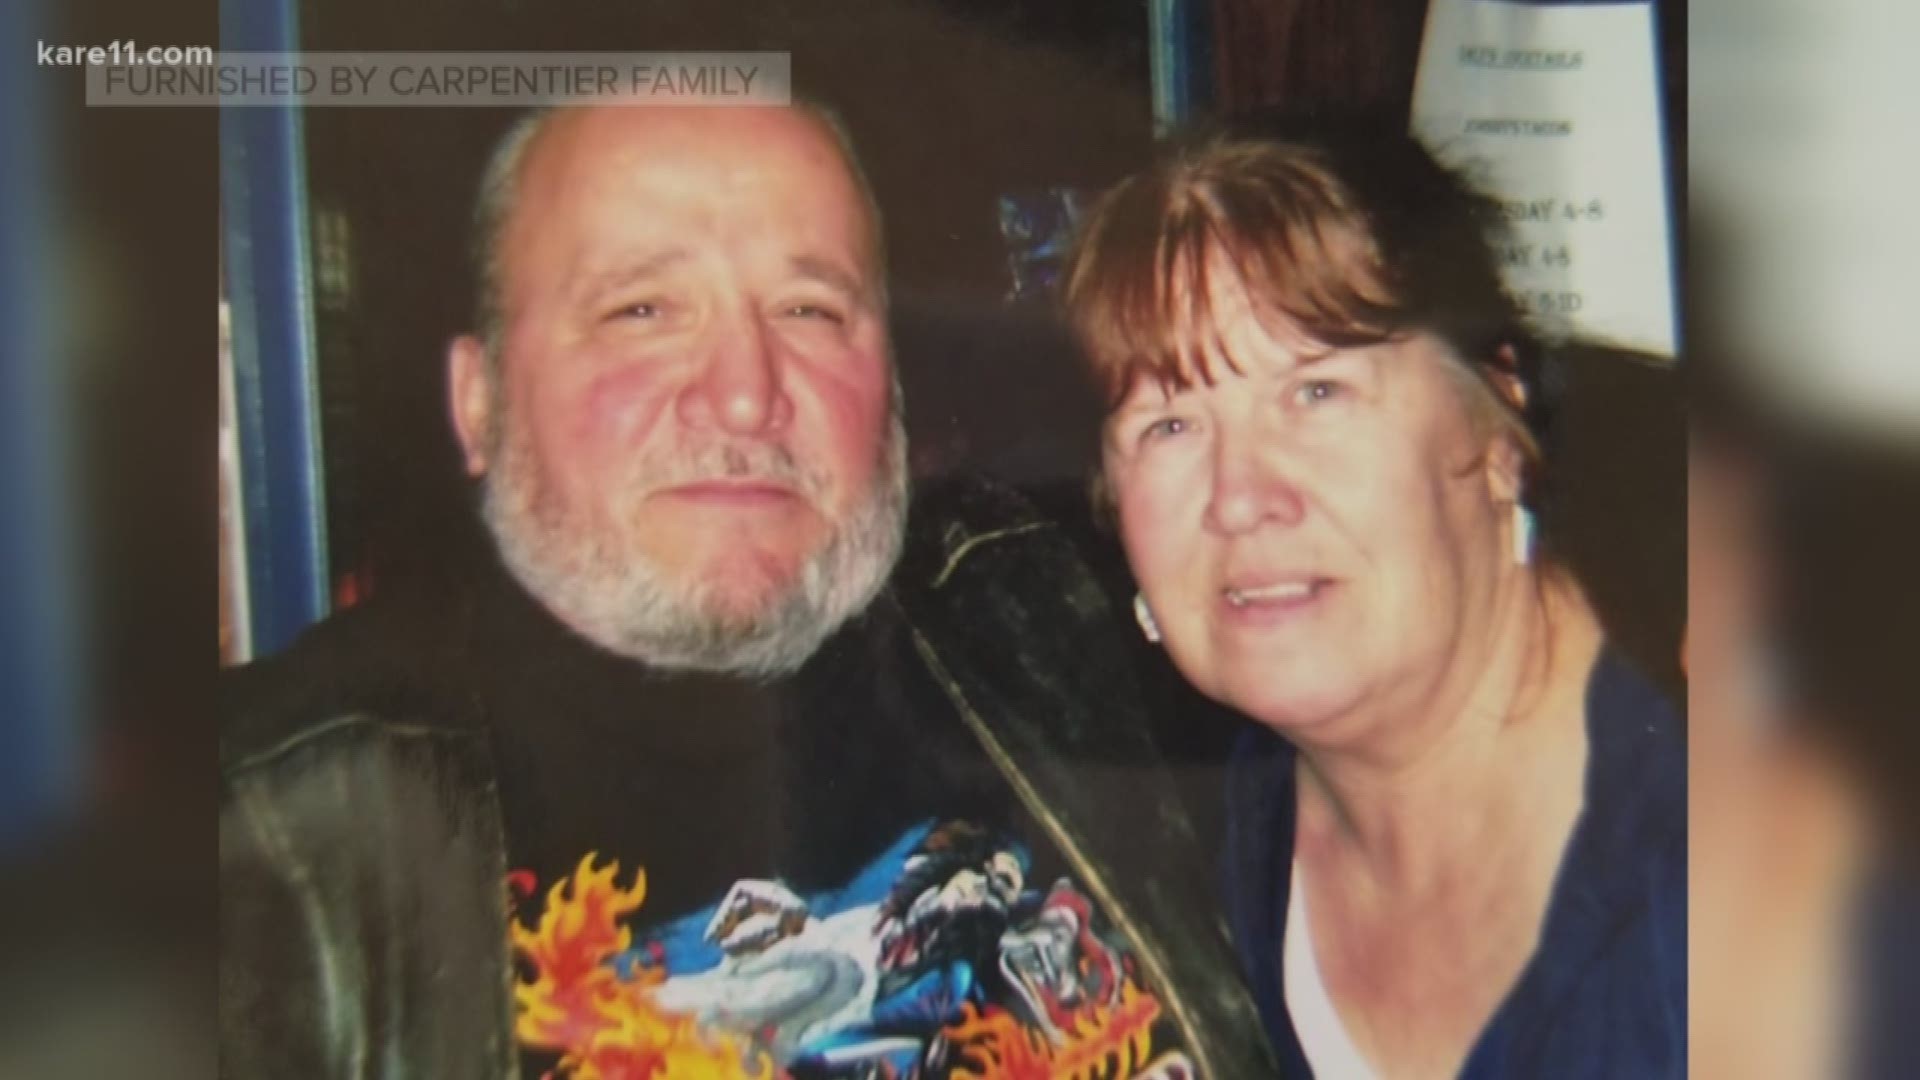 The State Patrol says three people were killed when a driver fleeing troopers hit another vehicle early Sunday morning in south Minneapolis. KARE 11's Chris Hrapsky talks to their loved ones who are now looking for answers. https://kare11.tv/2QVLrNs